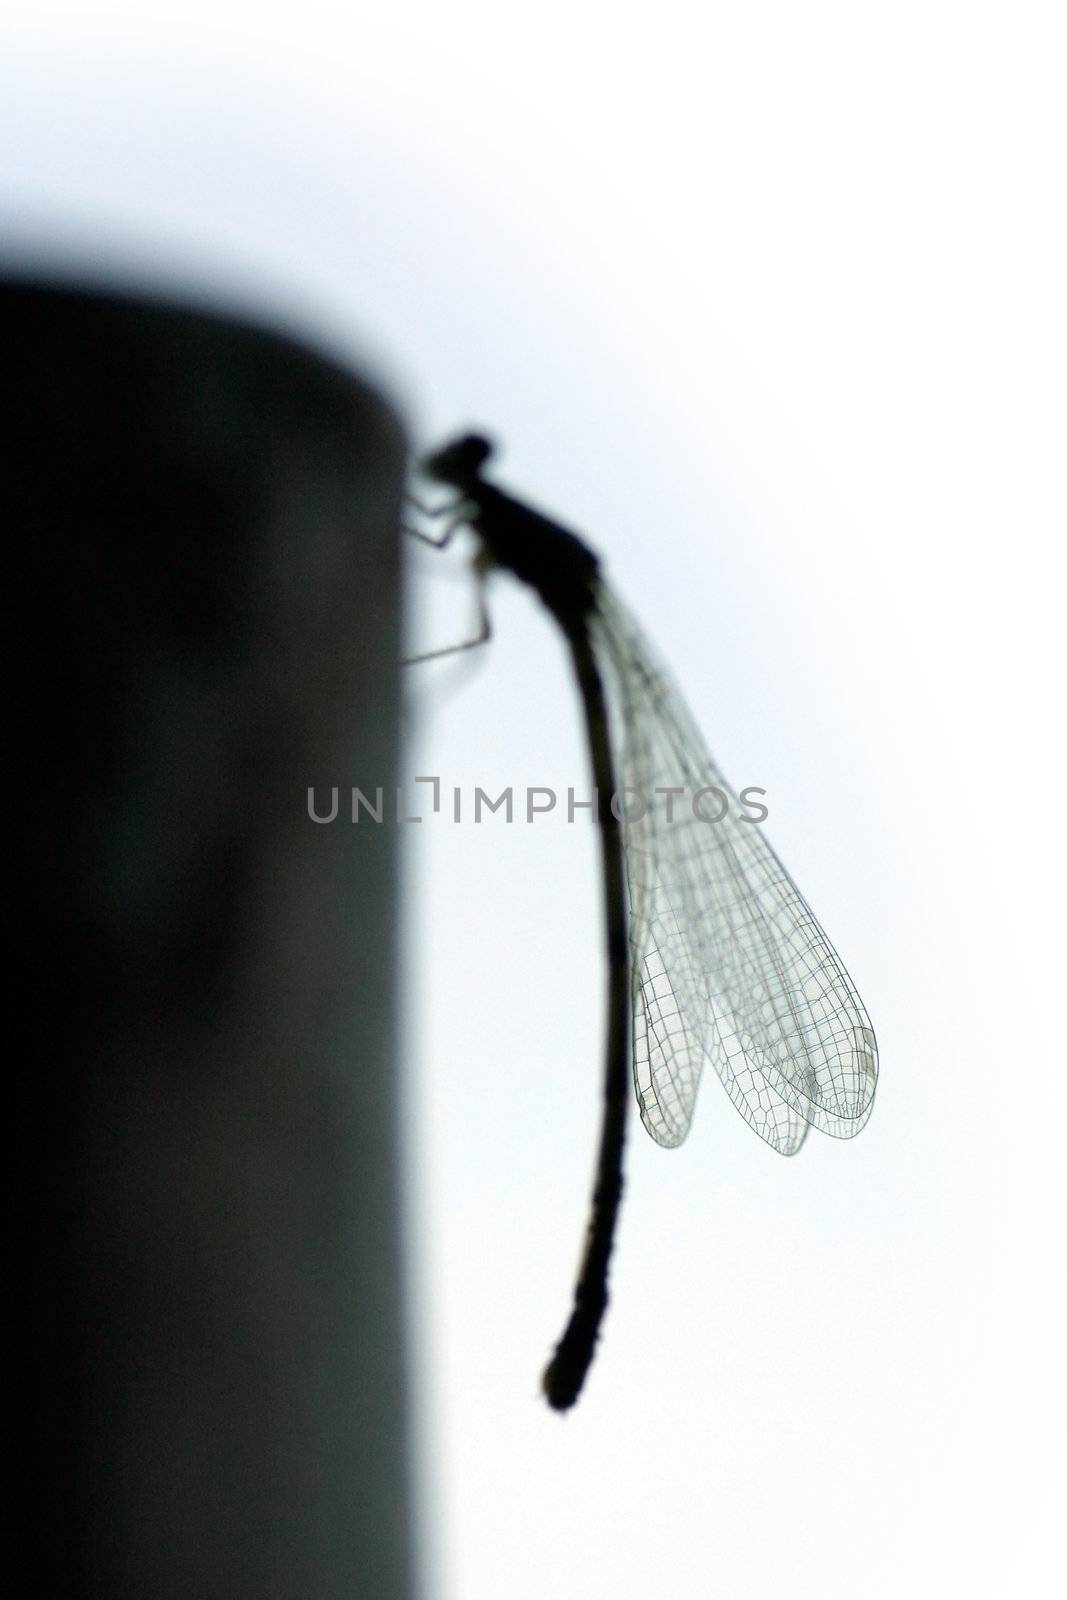 Dragonfly silhouette by micahbowerbank